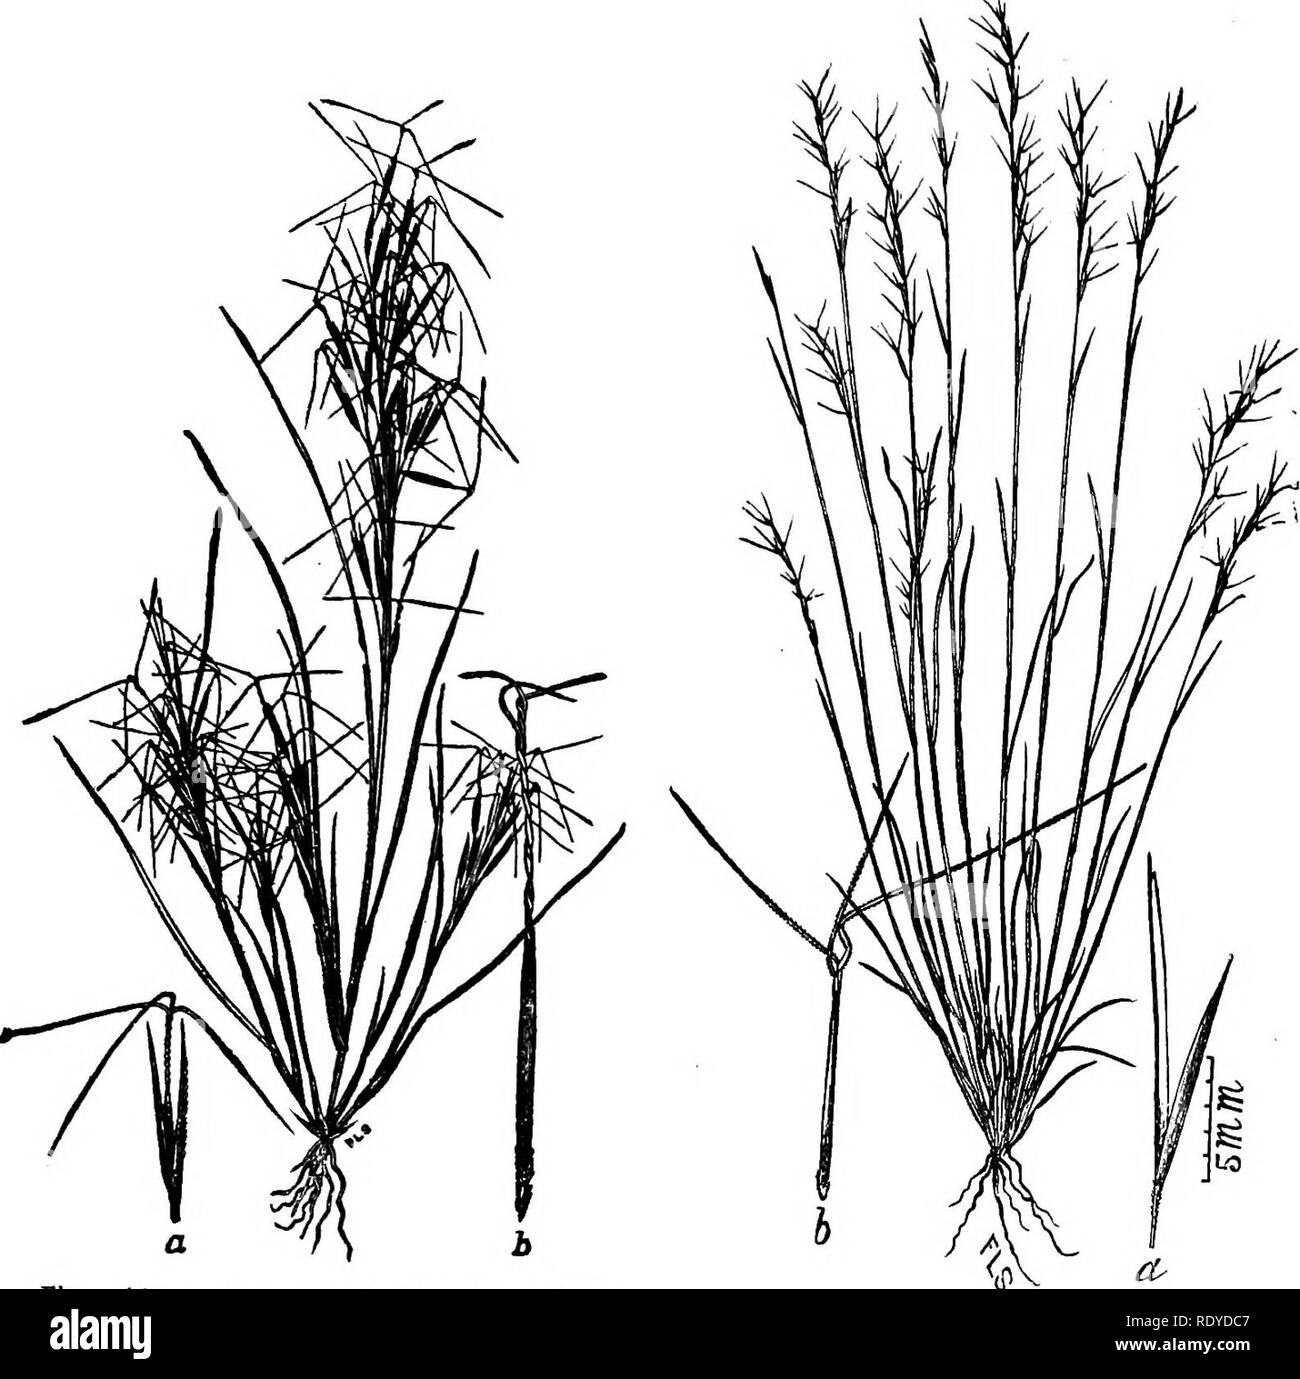 . A manual of poisonous plants, chiefly of eastern North America, with brief notes on economic and medicinal plants, and numerous illustrations. Poisonous plants. SPERMATOPHYTA-GRAMINEAE-GRASSES 353. Fig. 144a. Long-awned Poverty Grass (.Artsttda tuberculosa). a, Spikelet with lower glmne; b, flowering glume with divergent long awns. (U. S. Dept. Agrl.). Fig. 144b. Short-awned Poverty Grass. (A, basircmiea). Occurs in sandy and gravelly soils. (U. S. Dept. Agrl.). nearly equal, 12 lines long, awn-pointed; flowering glume about 10 lines long, twisted above to the division of the awns, and with  Stock Photo